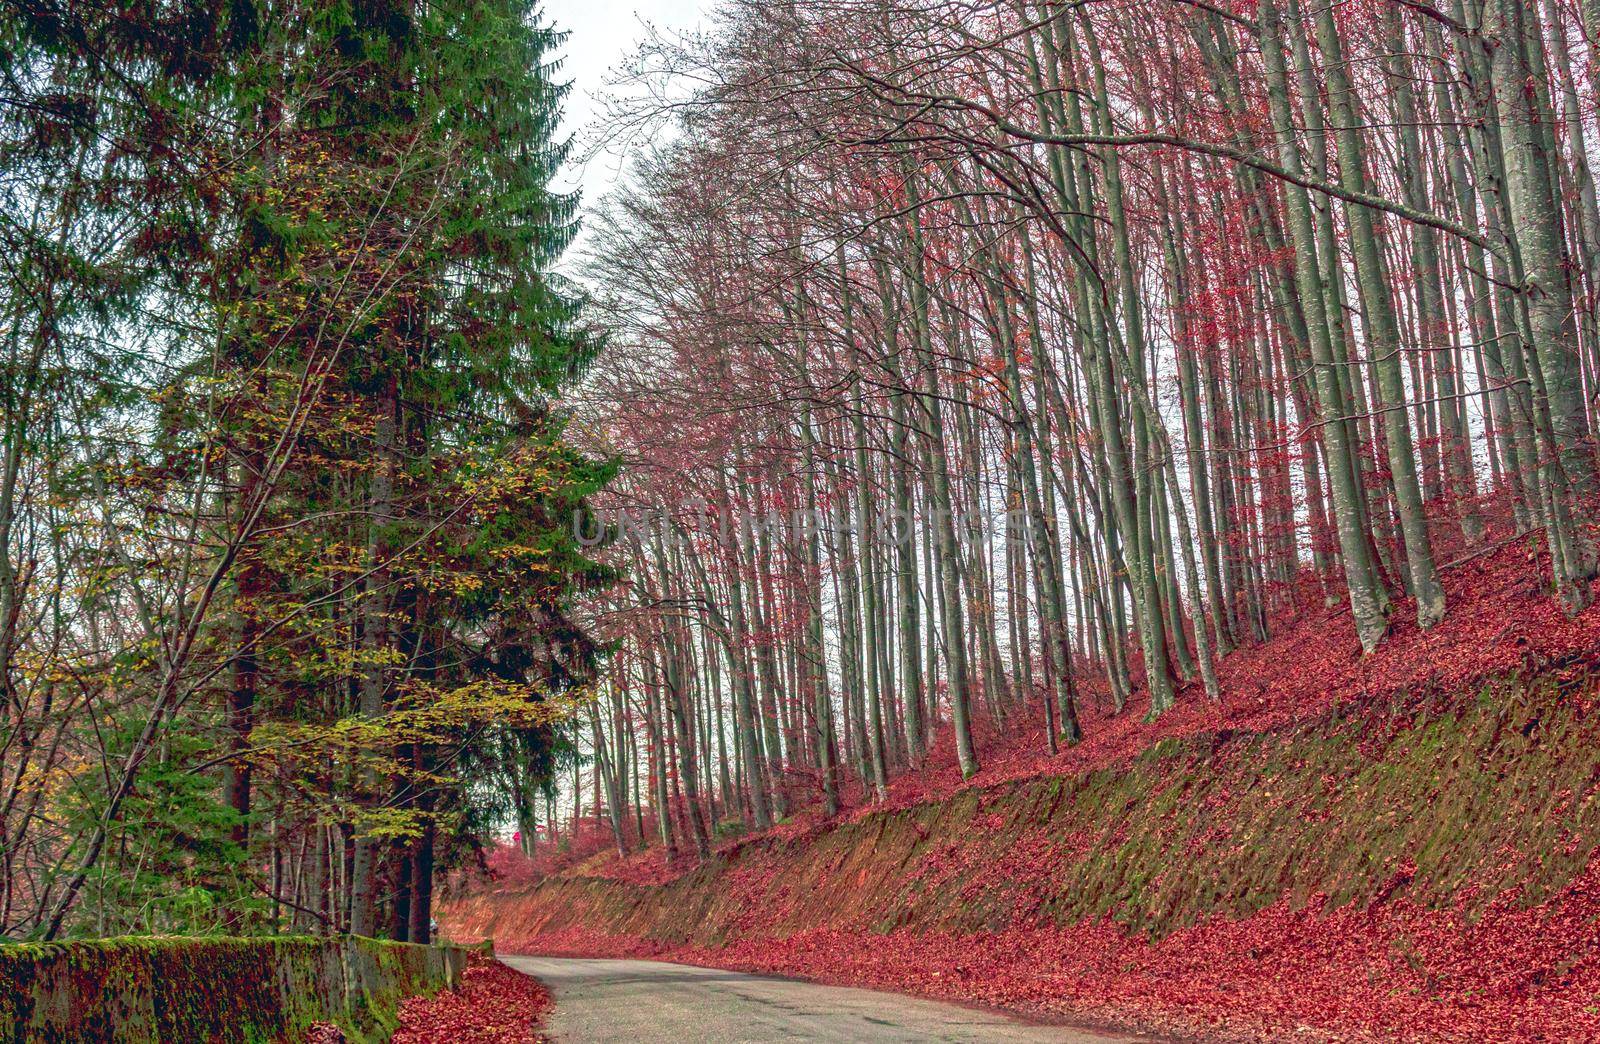 A country road near the forest by bybyphotography